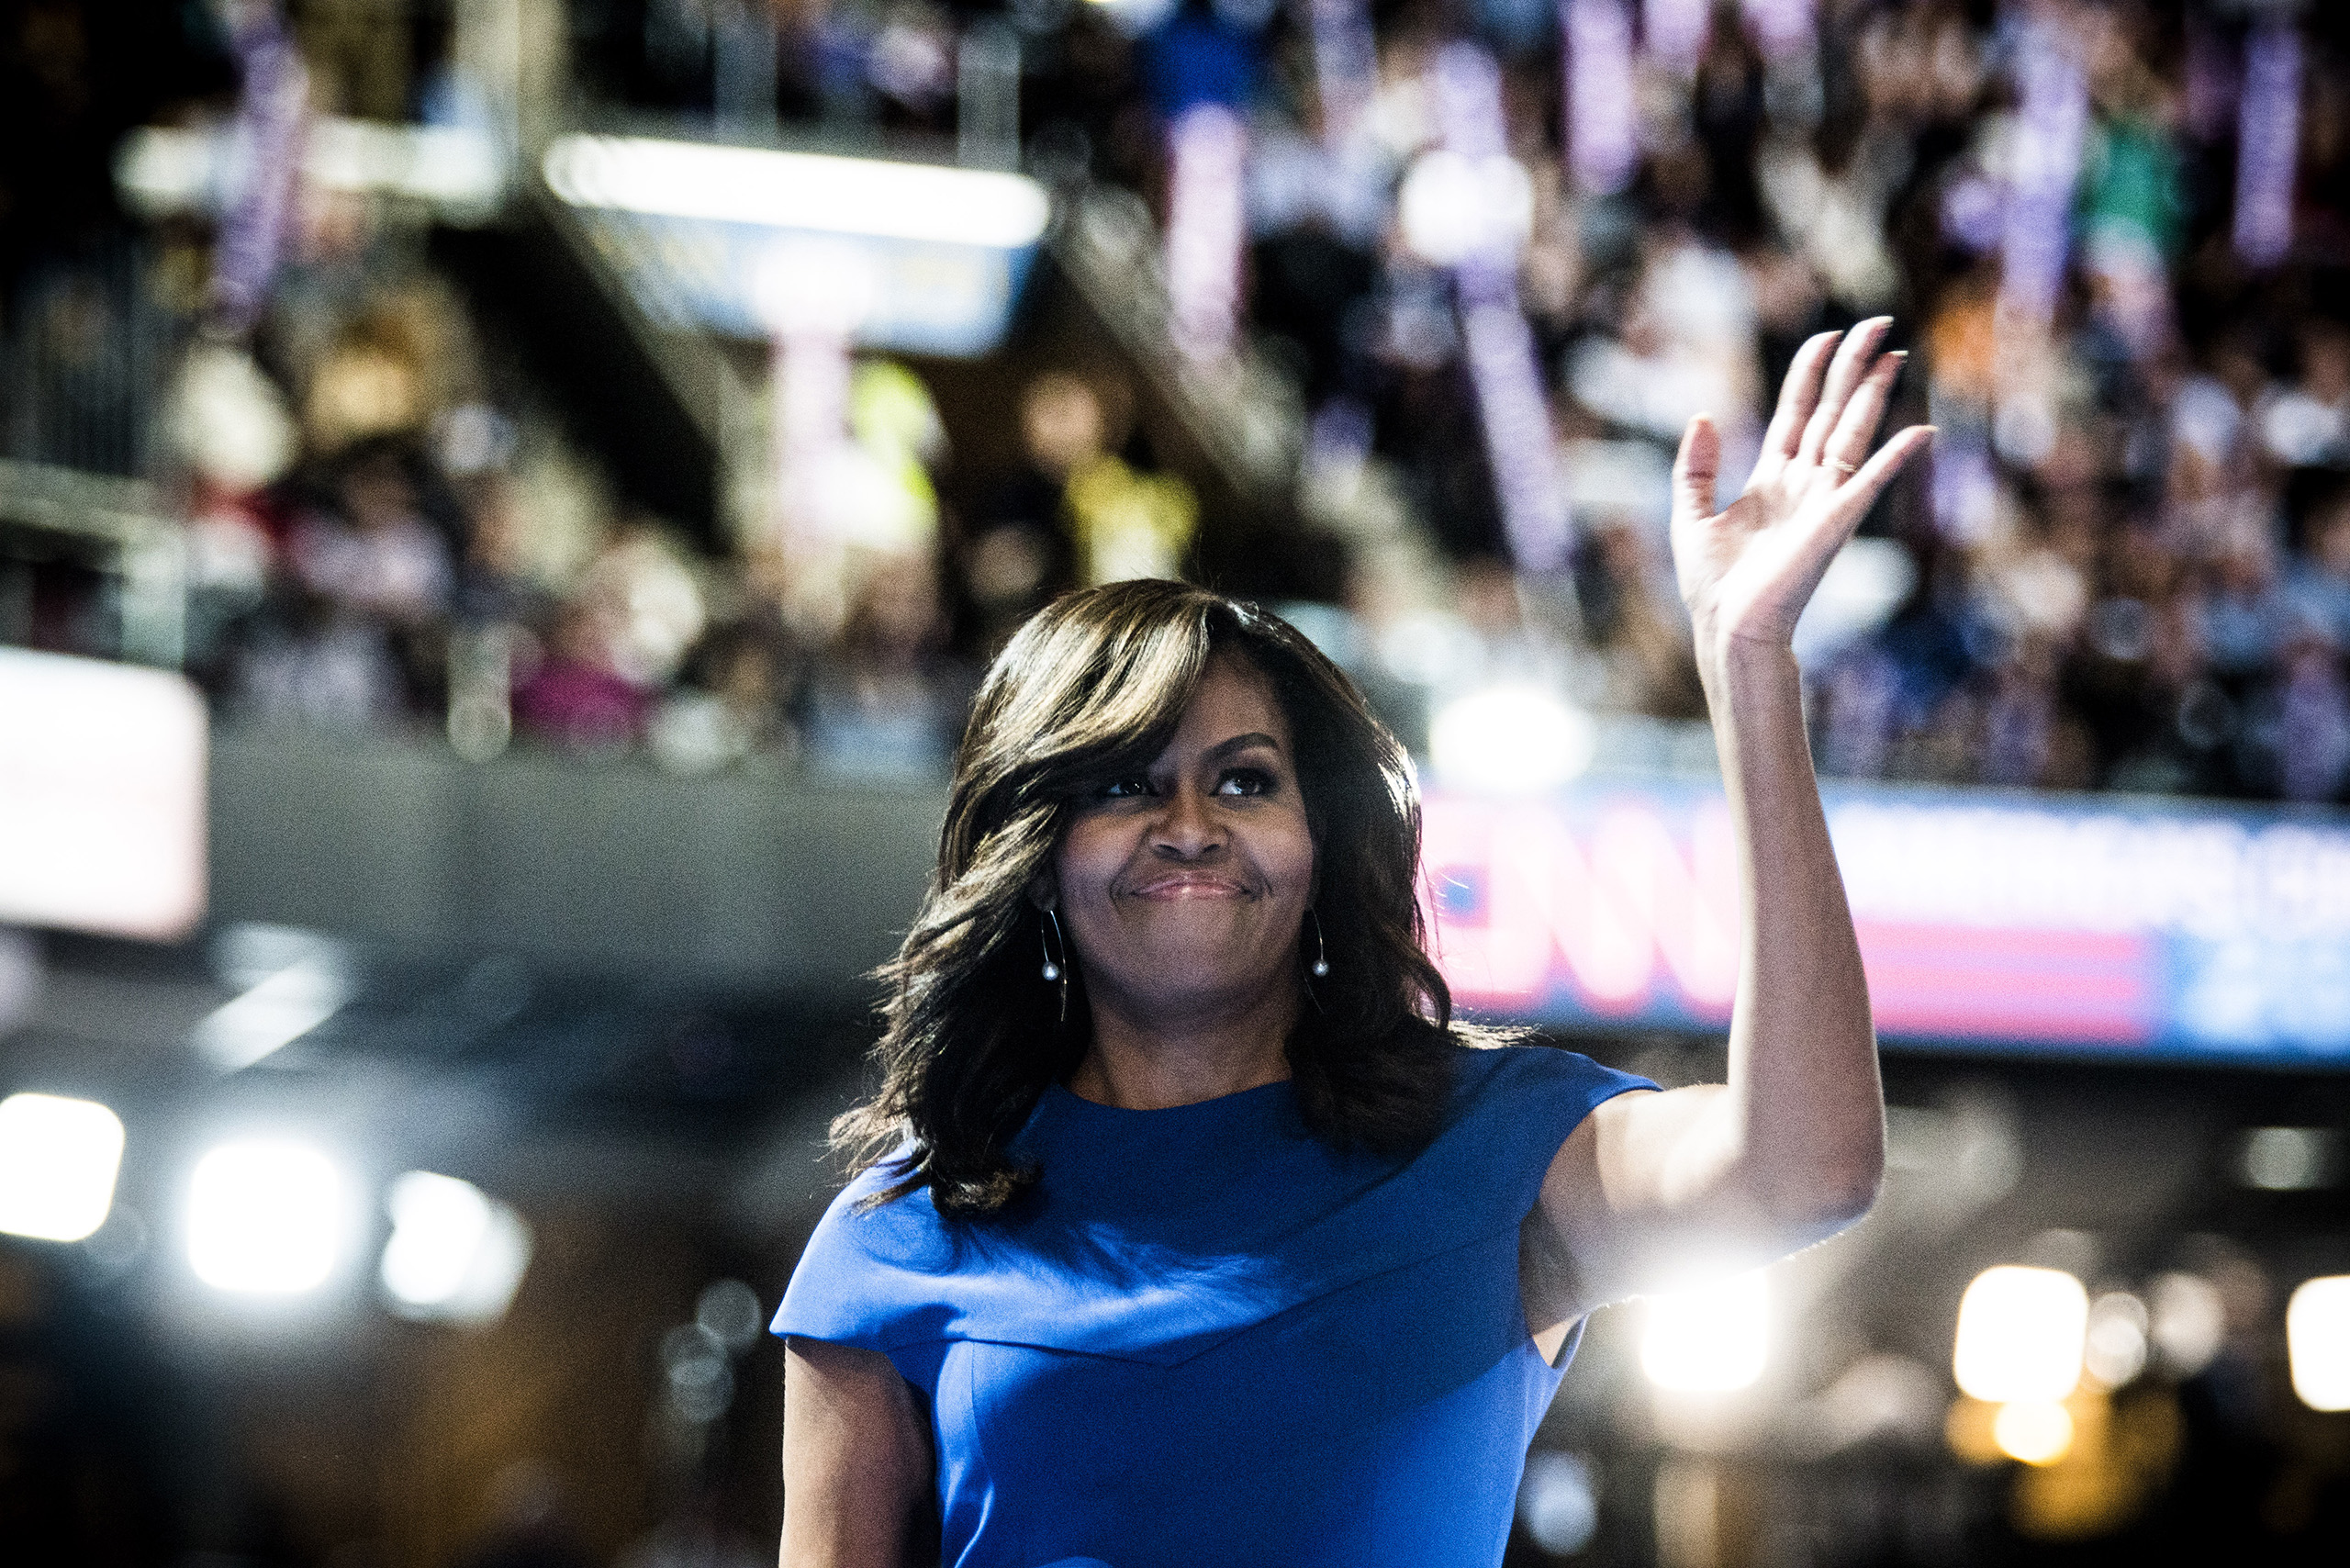 First lady Michelle Obama waves to the crowd before delivering remarks on the first day of the Democratic National Convention at the Wells Fargo Center, July 25, 2016 in Philadelphia, Pennsylvania.